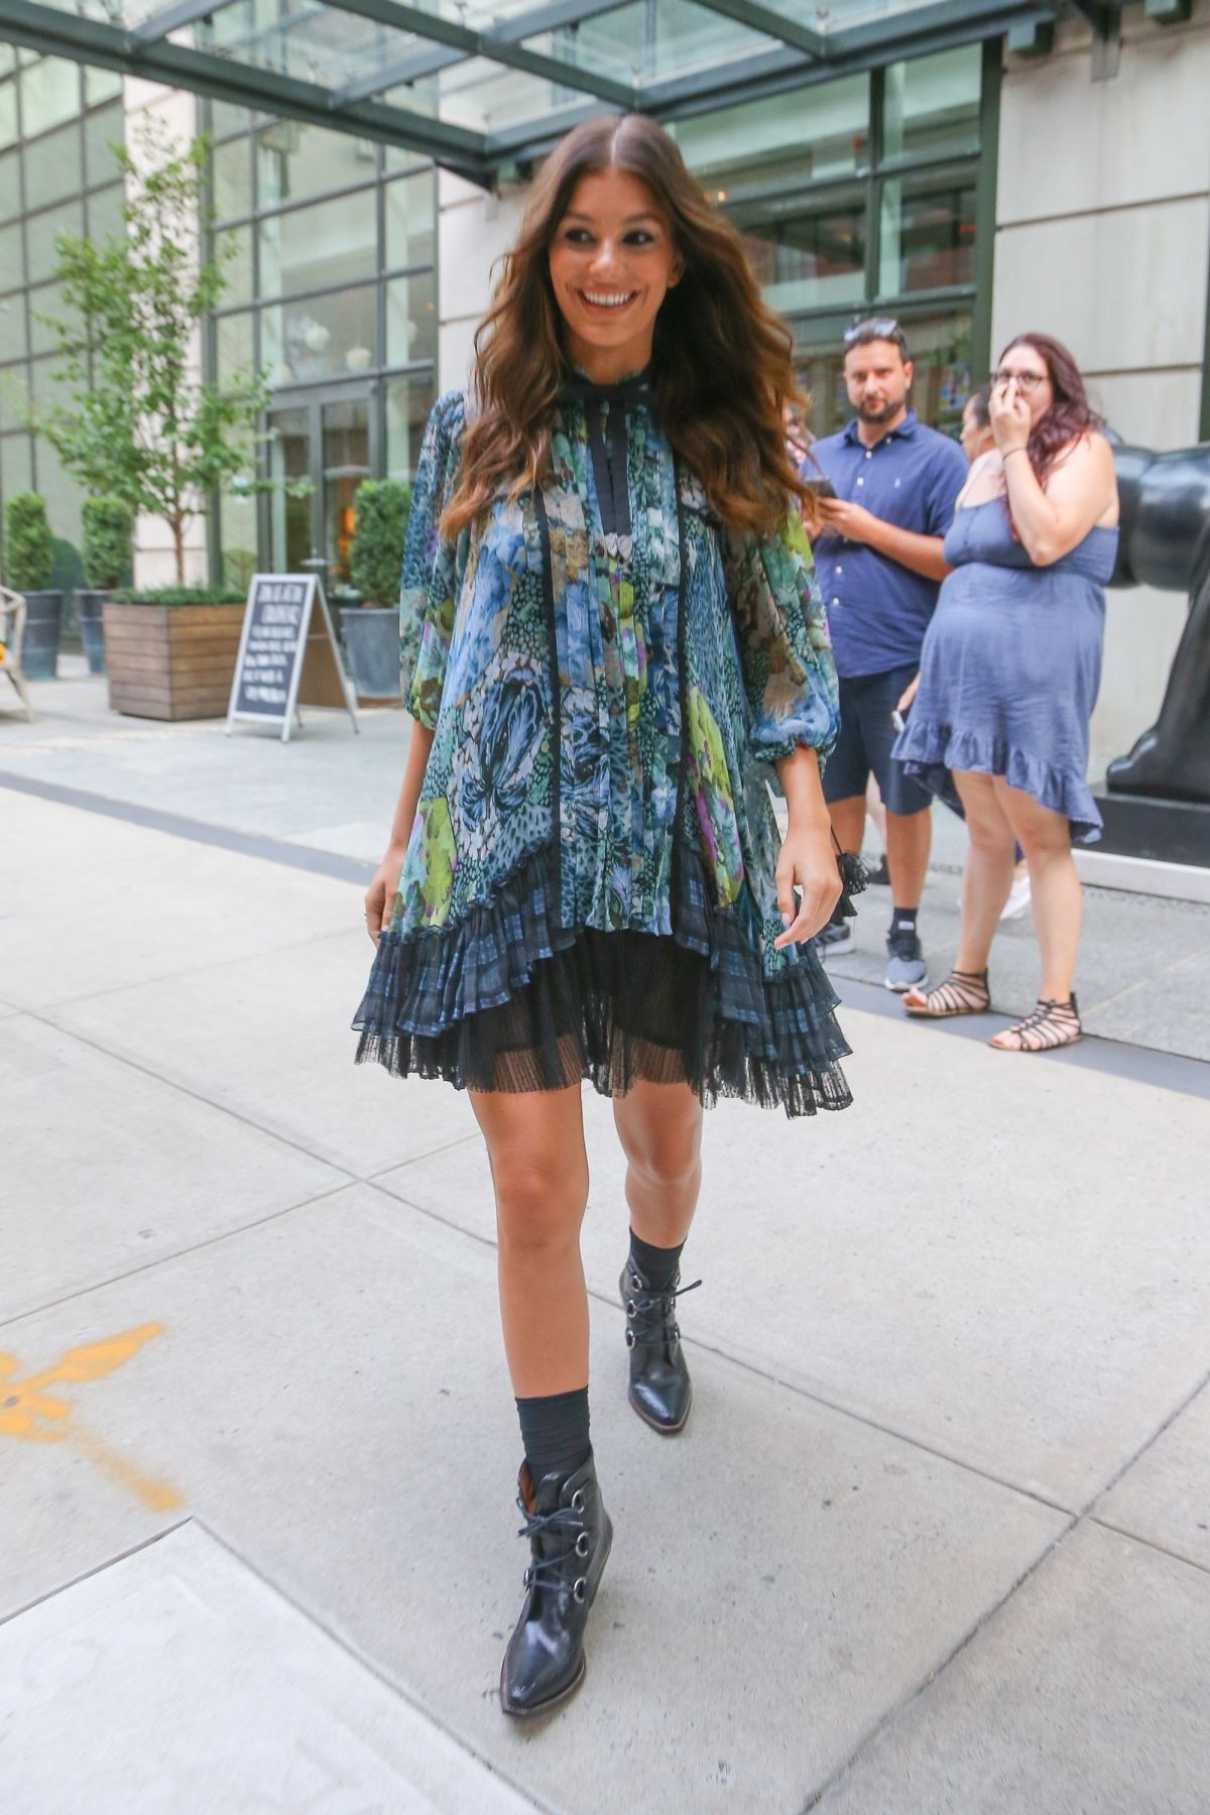 Camila Morrone in a Short Floral Dress